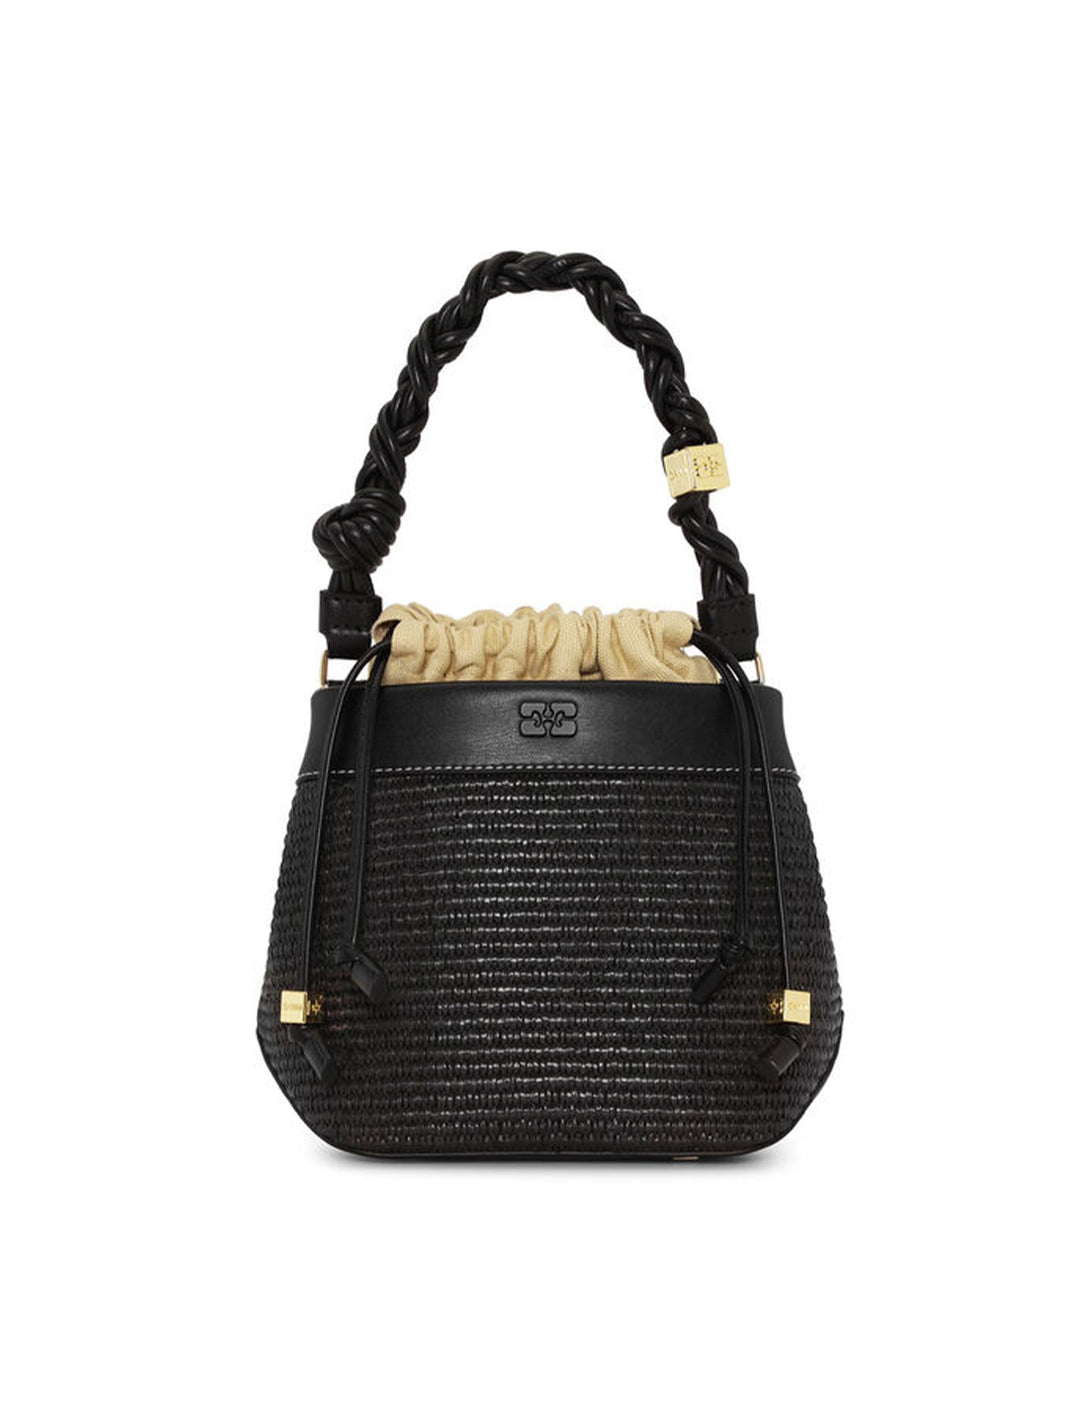 Front view of GANNI's bou bucket bag in black and raffia.